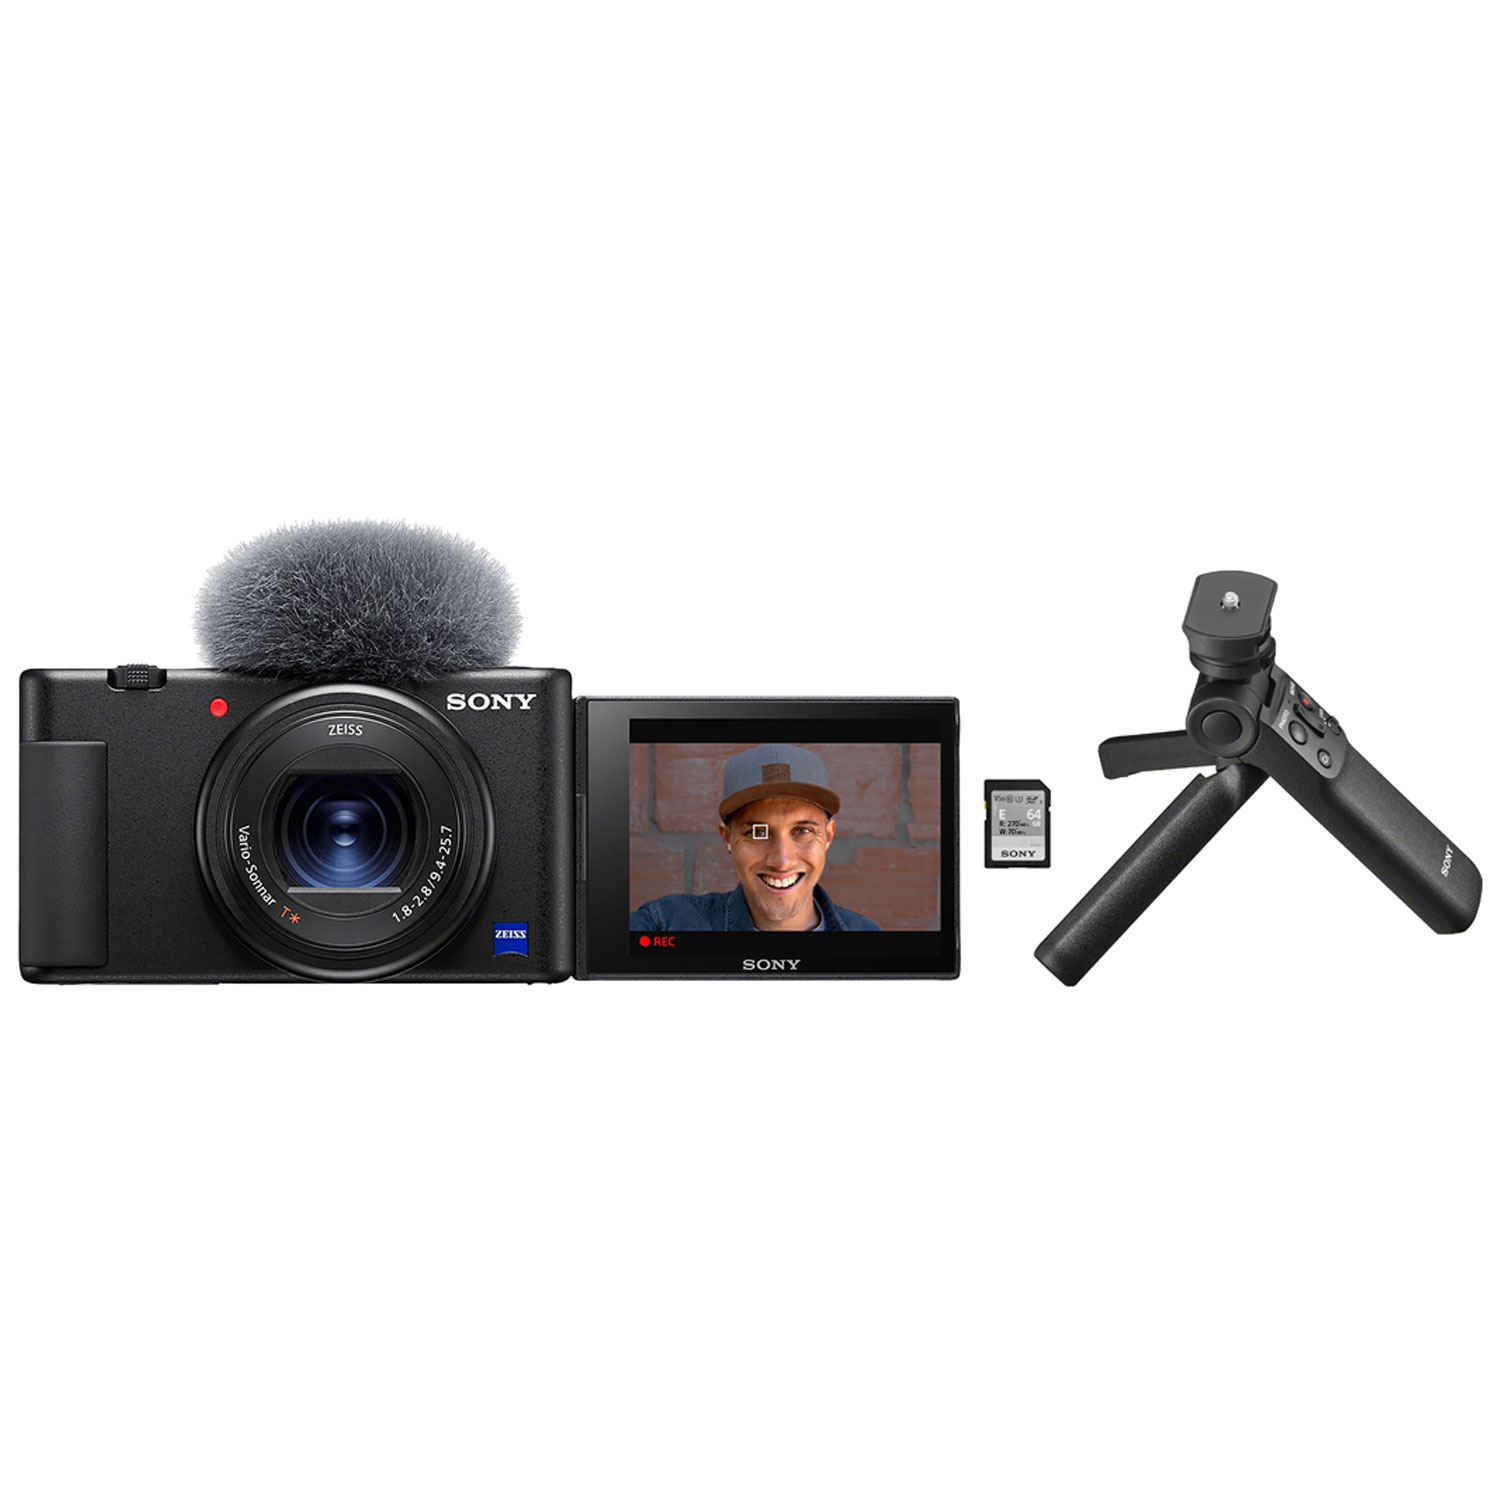 Sony Cyber-shot ZV-1 Content Creator Vlogger 20.1MP 2.9x Optical Zoom Digital Camera & Accessory Kit